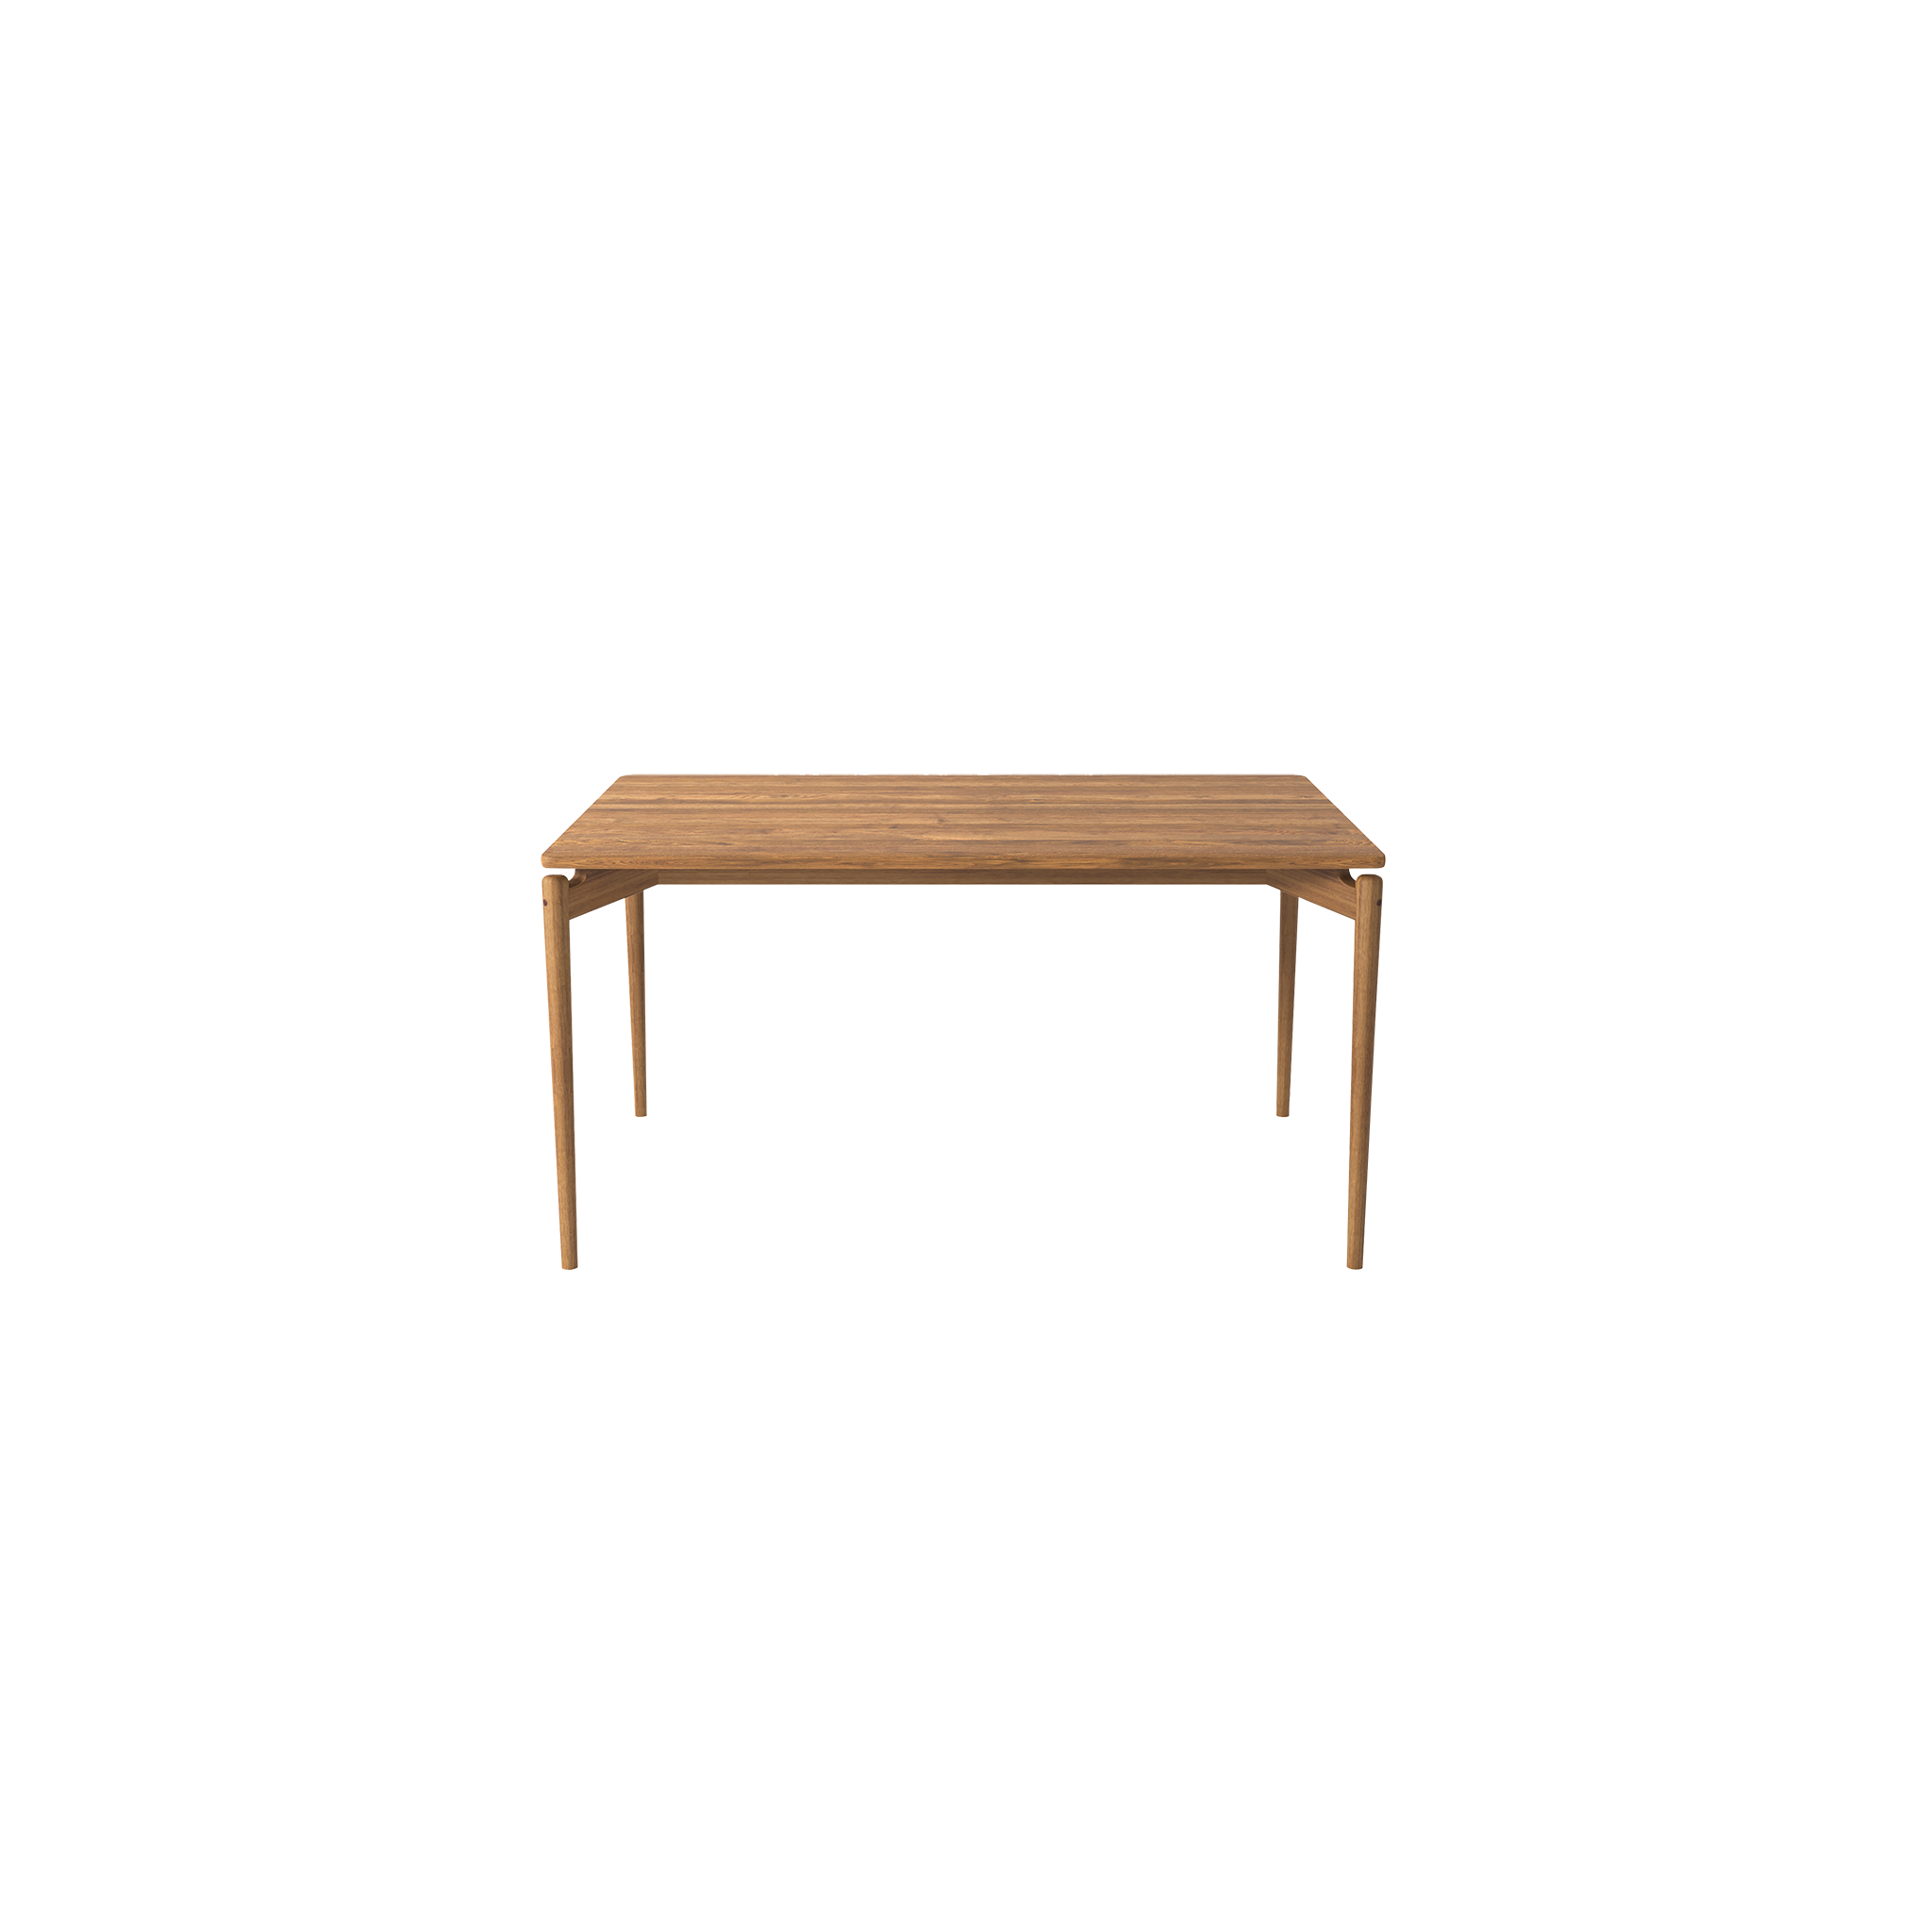 PURE Dining Table 85x85 PURE Dining Table 85x85 Bruunmunch Furniture